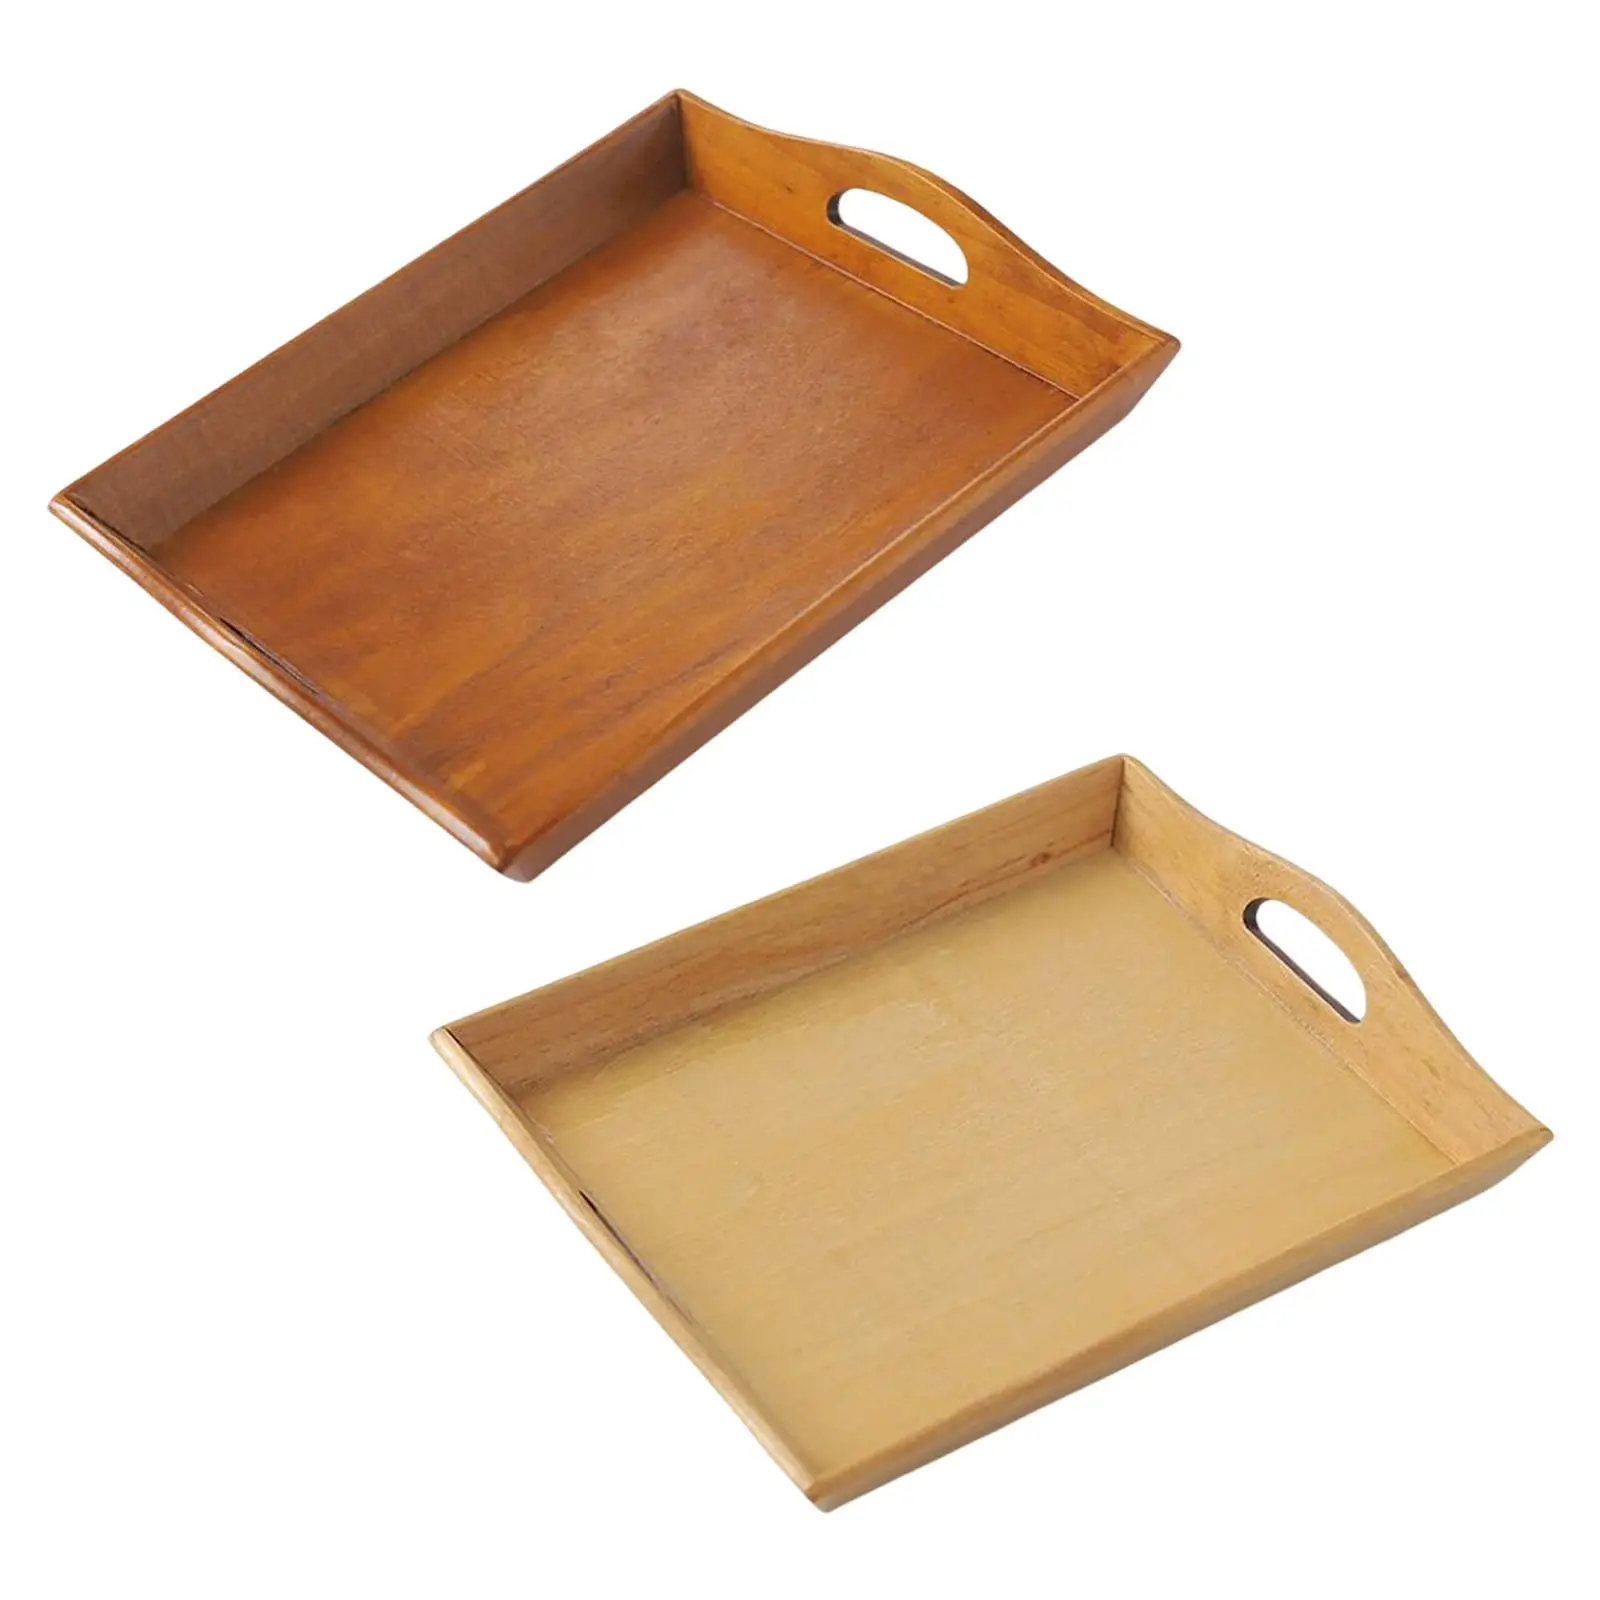 Wooden Serving Tray Tea Coffee Drinks Serving Tray Decorative for Home